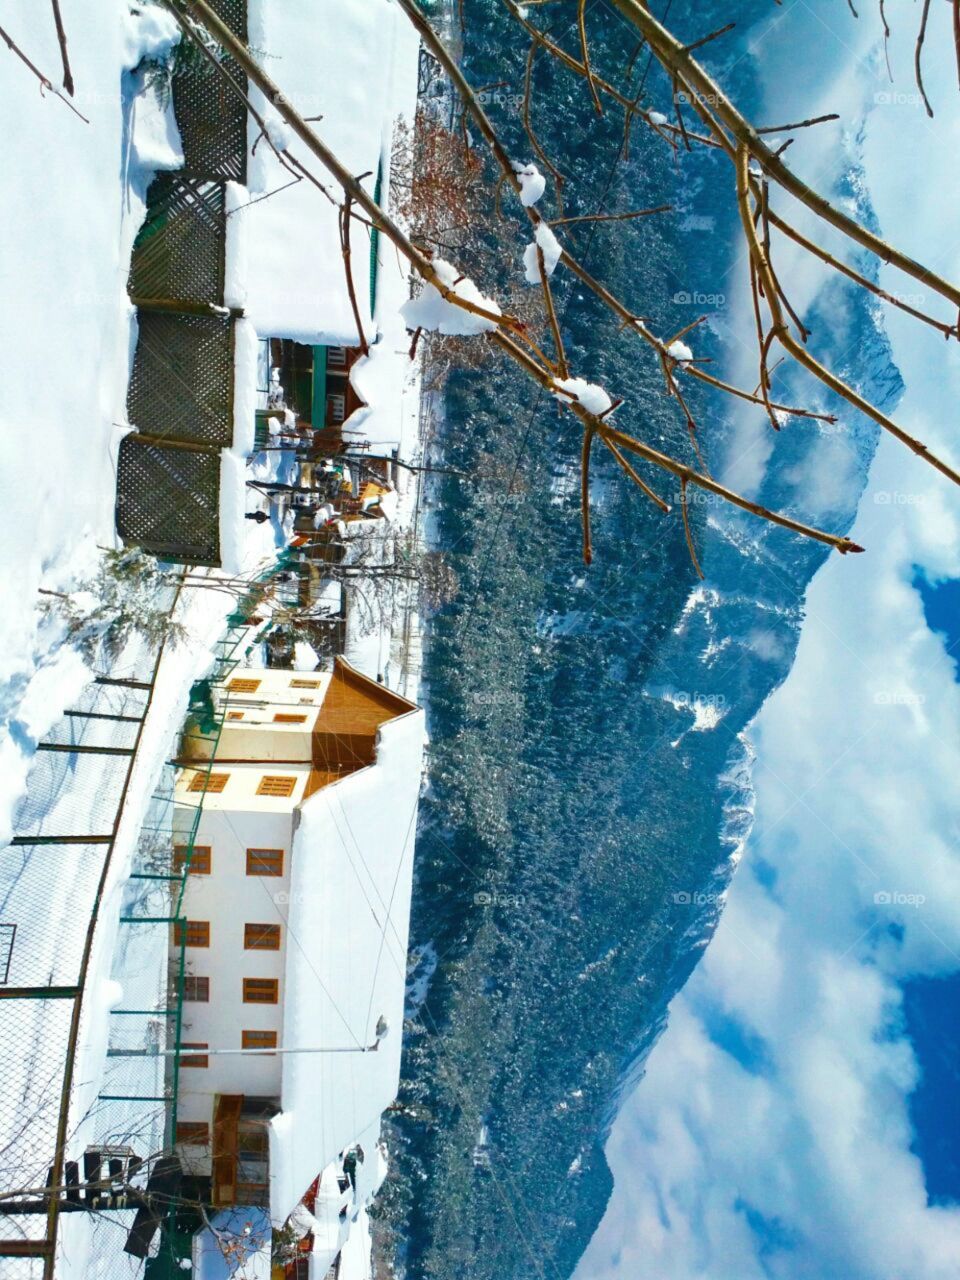 Kashmir paradise on earth”mountains, huts covered with snow” 